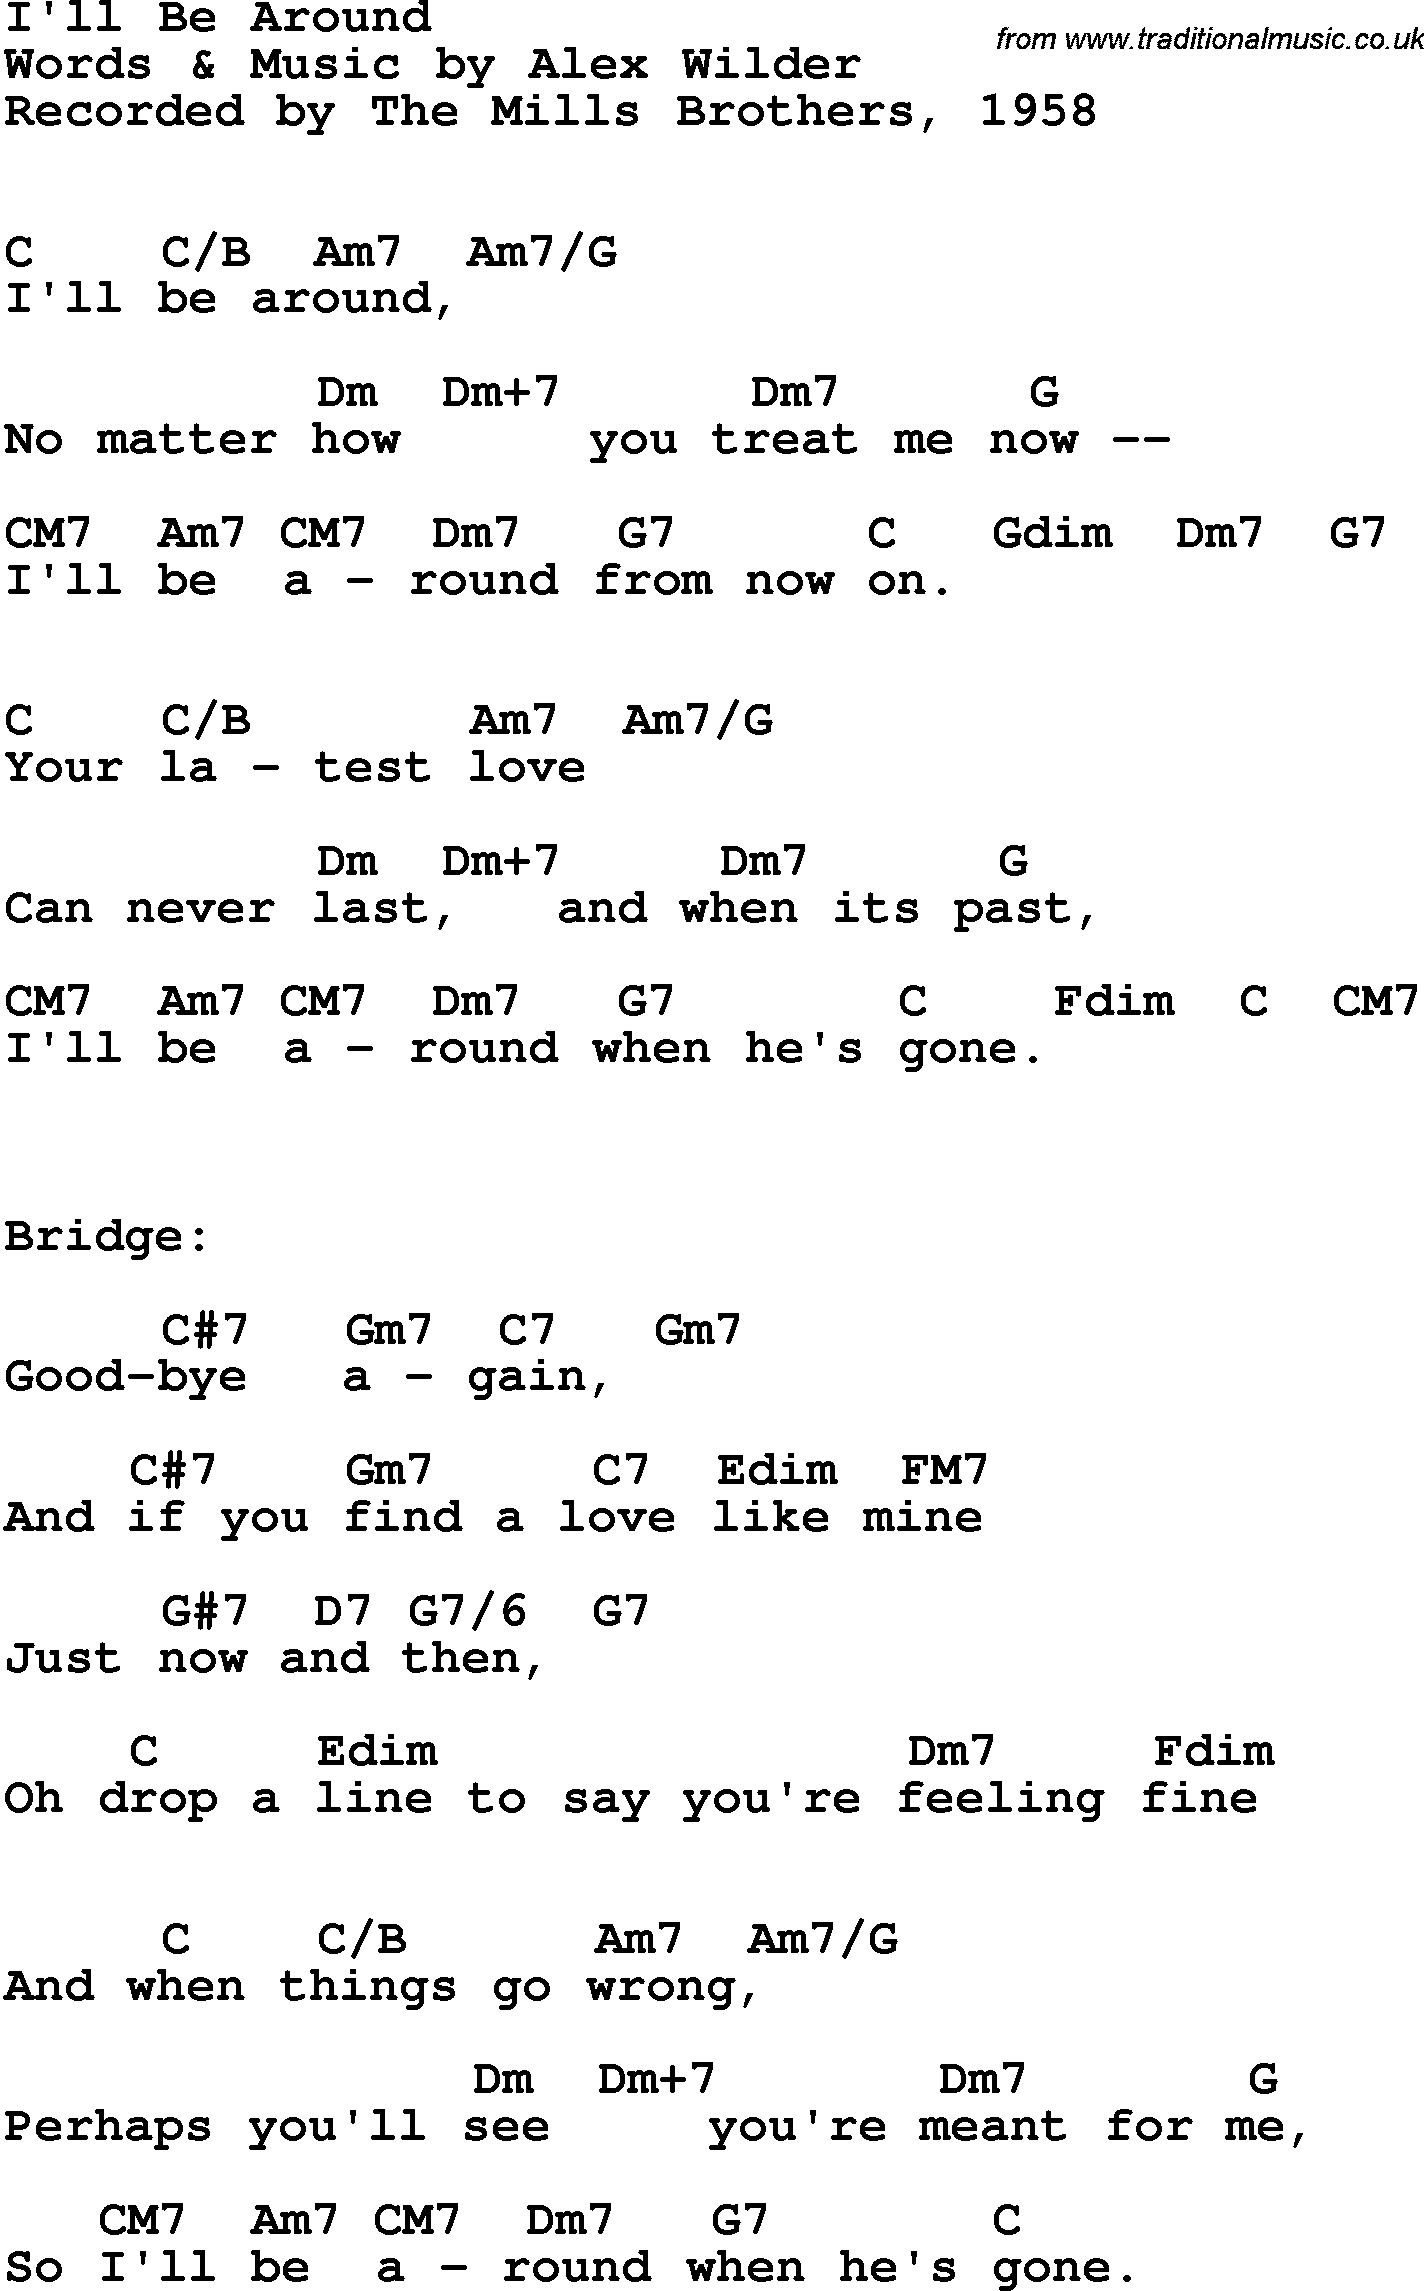 Song Lyrics with guitar chords for I'll Be Around - The Mills Brothers, 1958